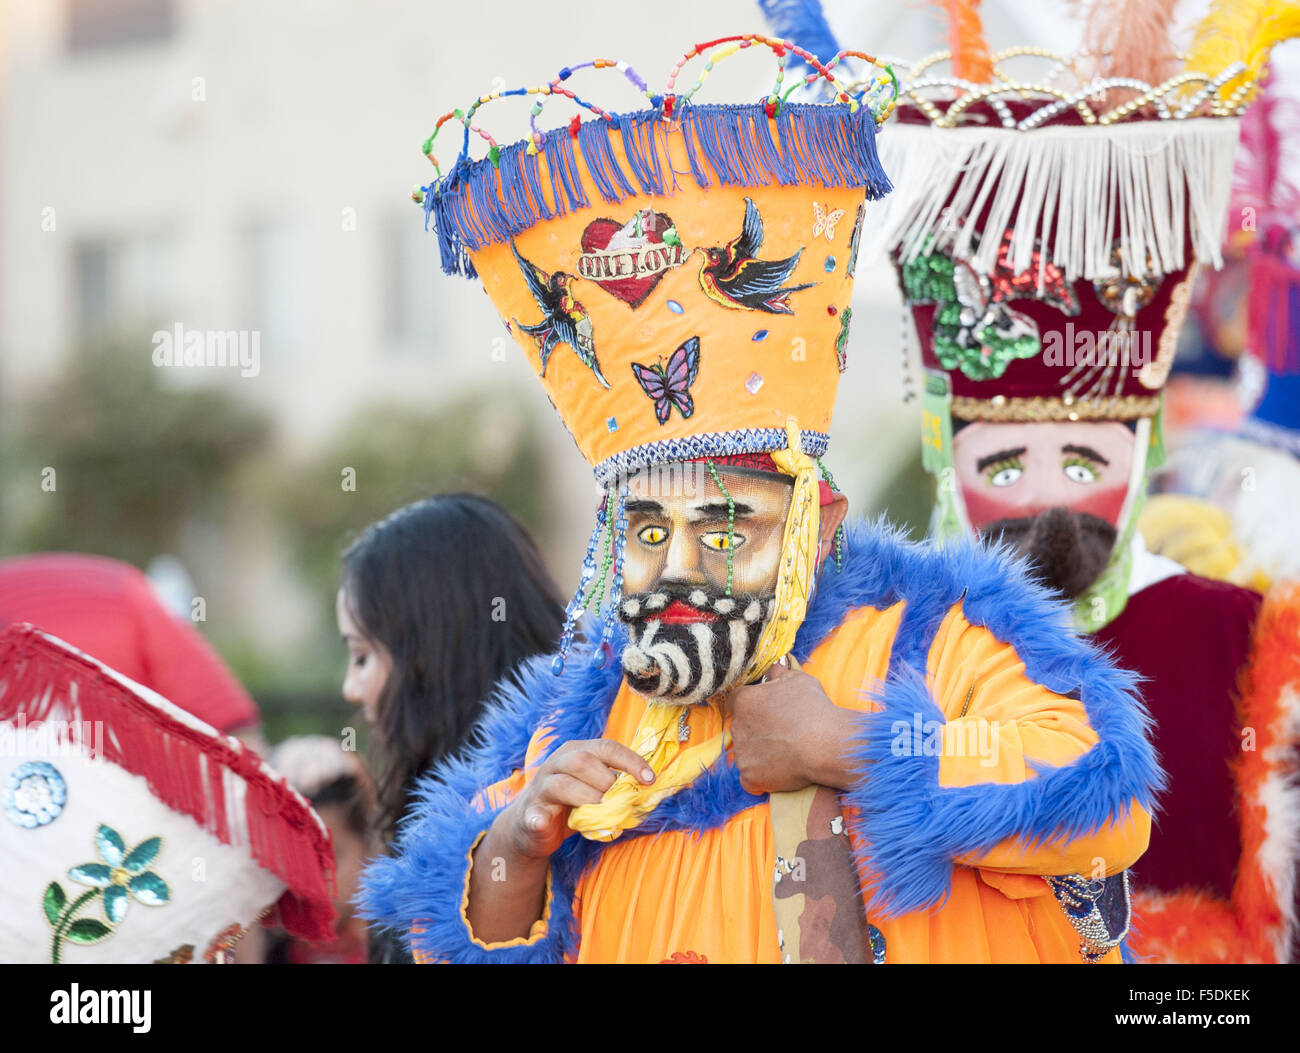 Huntington Beach, California, USA. 24th July, 2015. A Chinelo adjusts his  costume before beginning a performance. --- Residents from the Oak View  Neighborhood celebrated on Friday evening with Traditional Mexican Chinelo  Dancers.